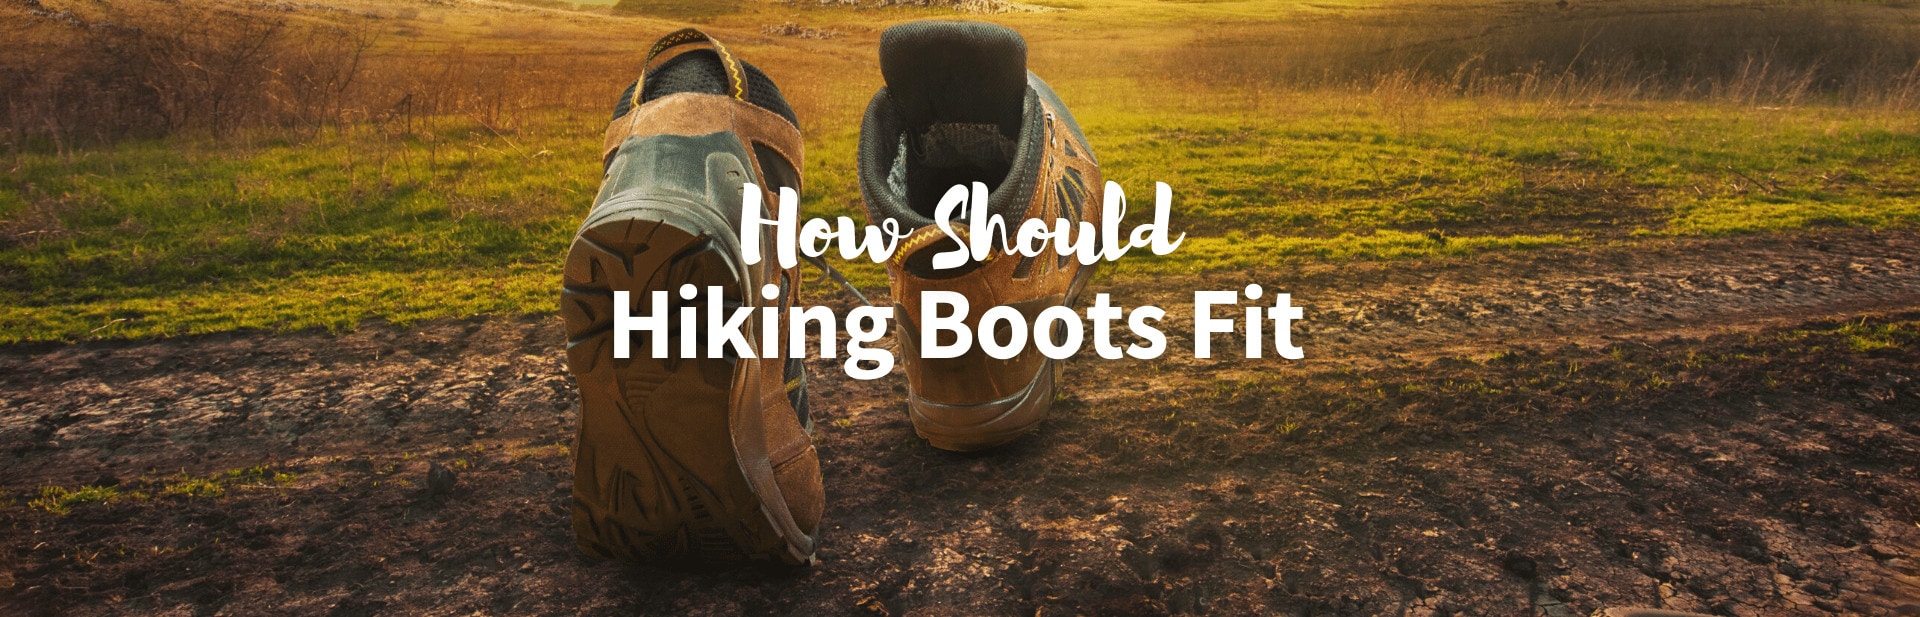 Ensure Your Adventure Starts on the Right Foot: How Should Hiking Boots Fit?